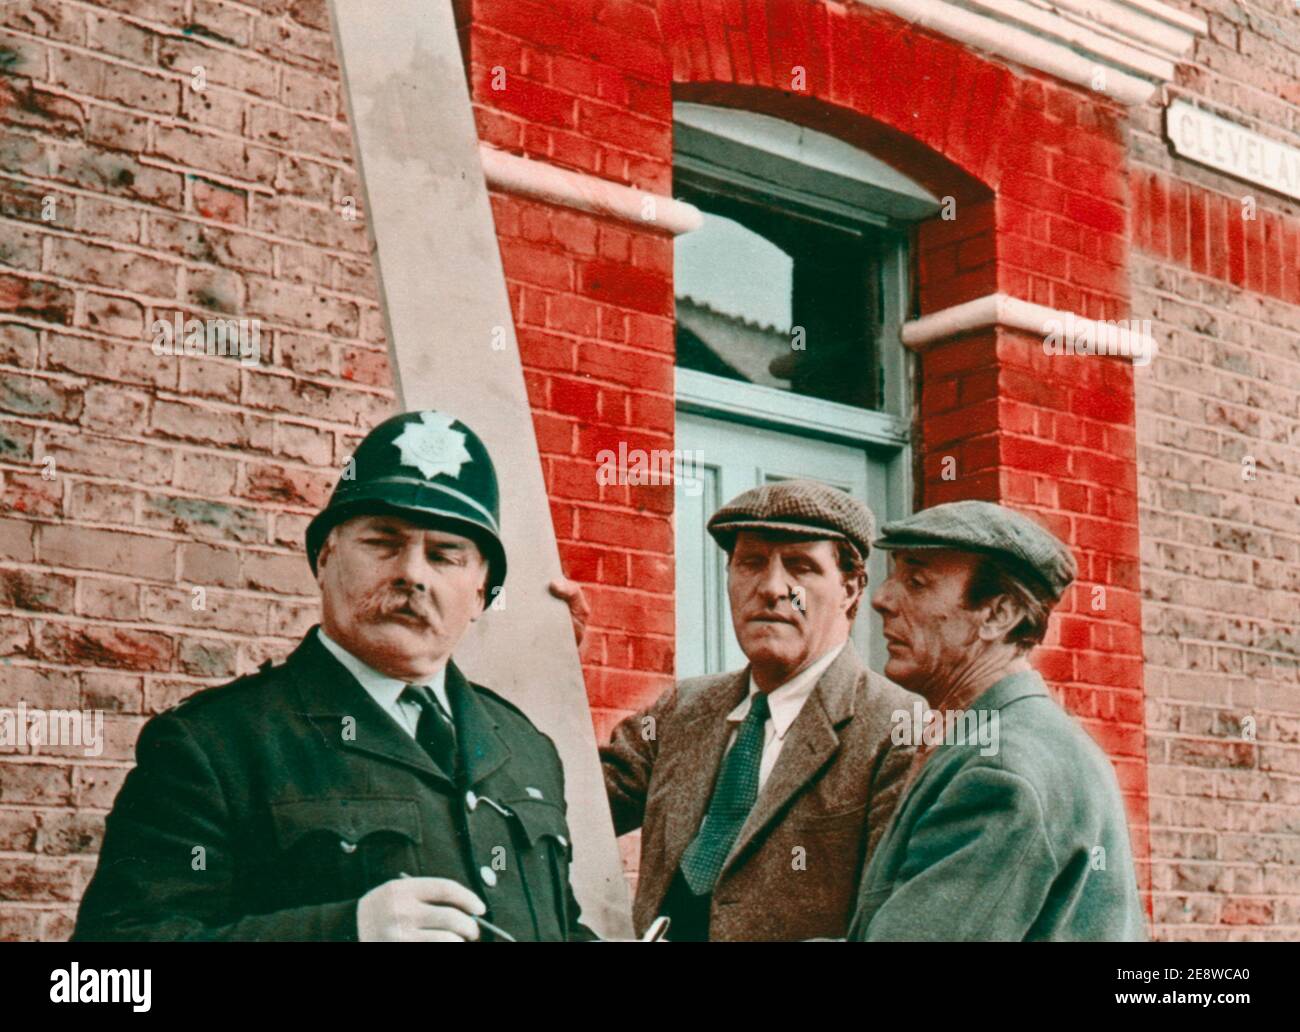 The Plank is a 1967 British slapstick comedy film starring Tommy Cooper and Eric Sykes. Tommy Cooper was born on march 19 1921 and died april 15 1984. Jimmy Edwards as the Policeman. Stock Photo